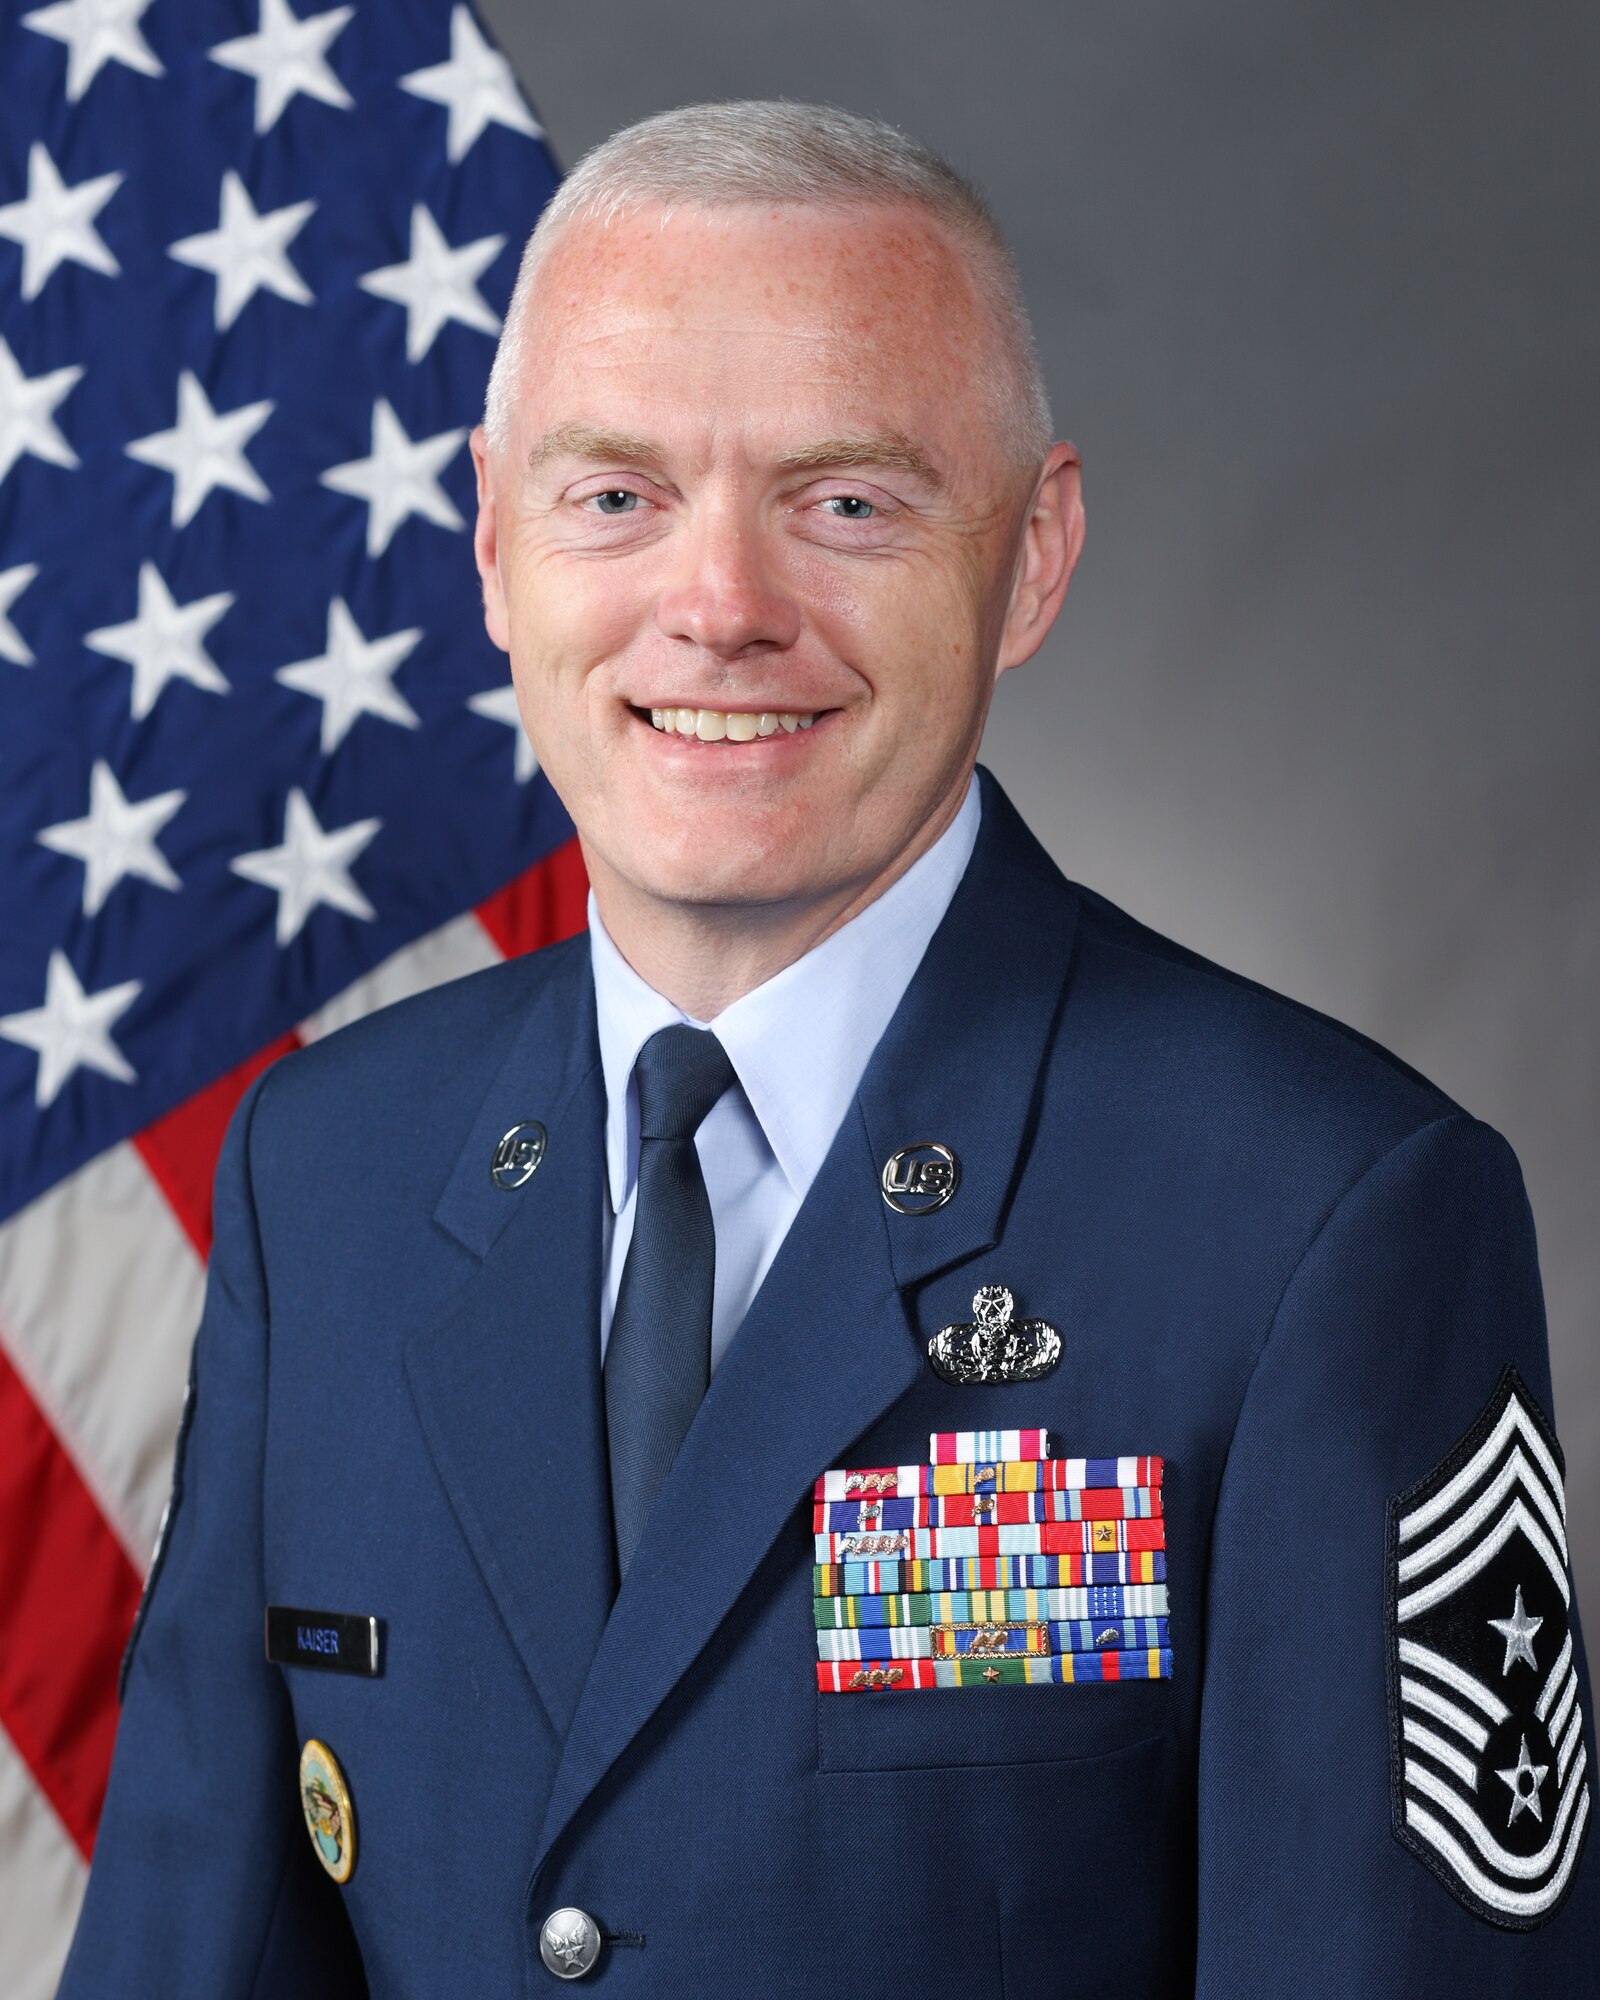 Chief Master Sgt. Andy Kaiser is the command chief master sergeant for Air Mobility Command at Scott Air Force Base, Ill. (U.S. Air Force Photo)